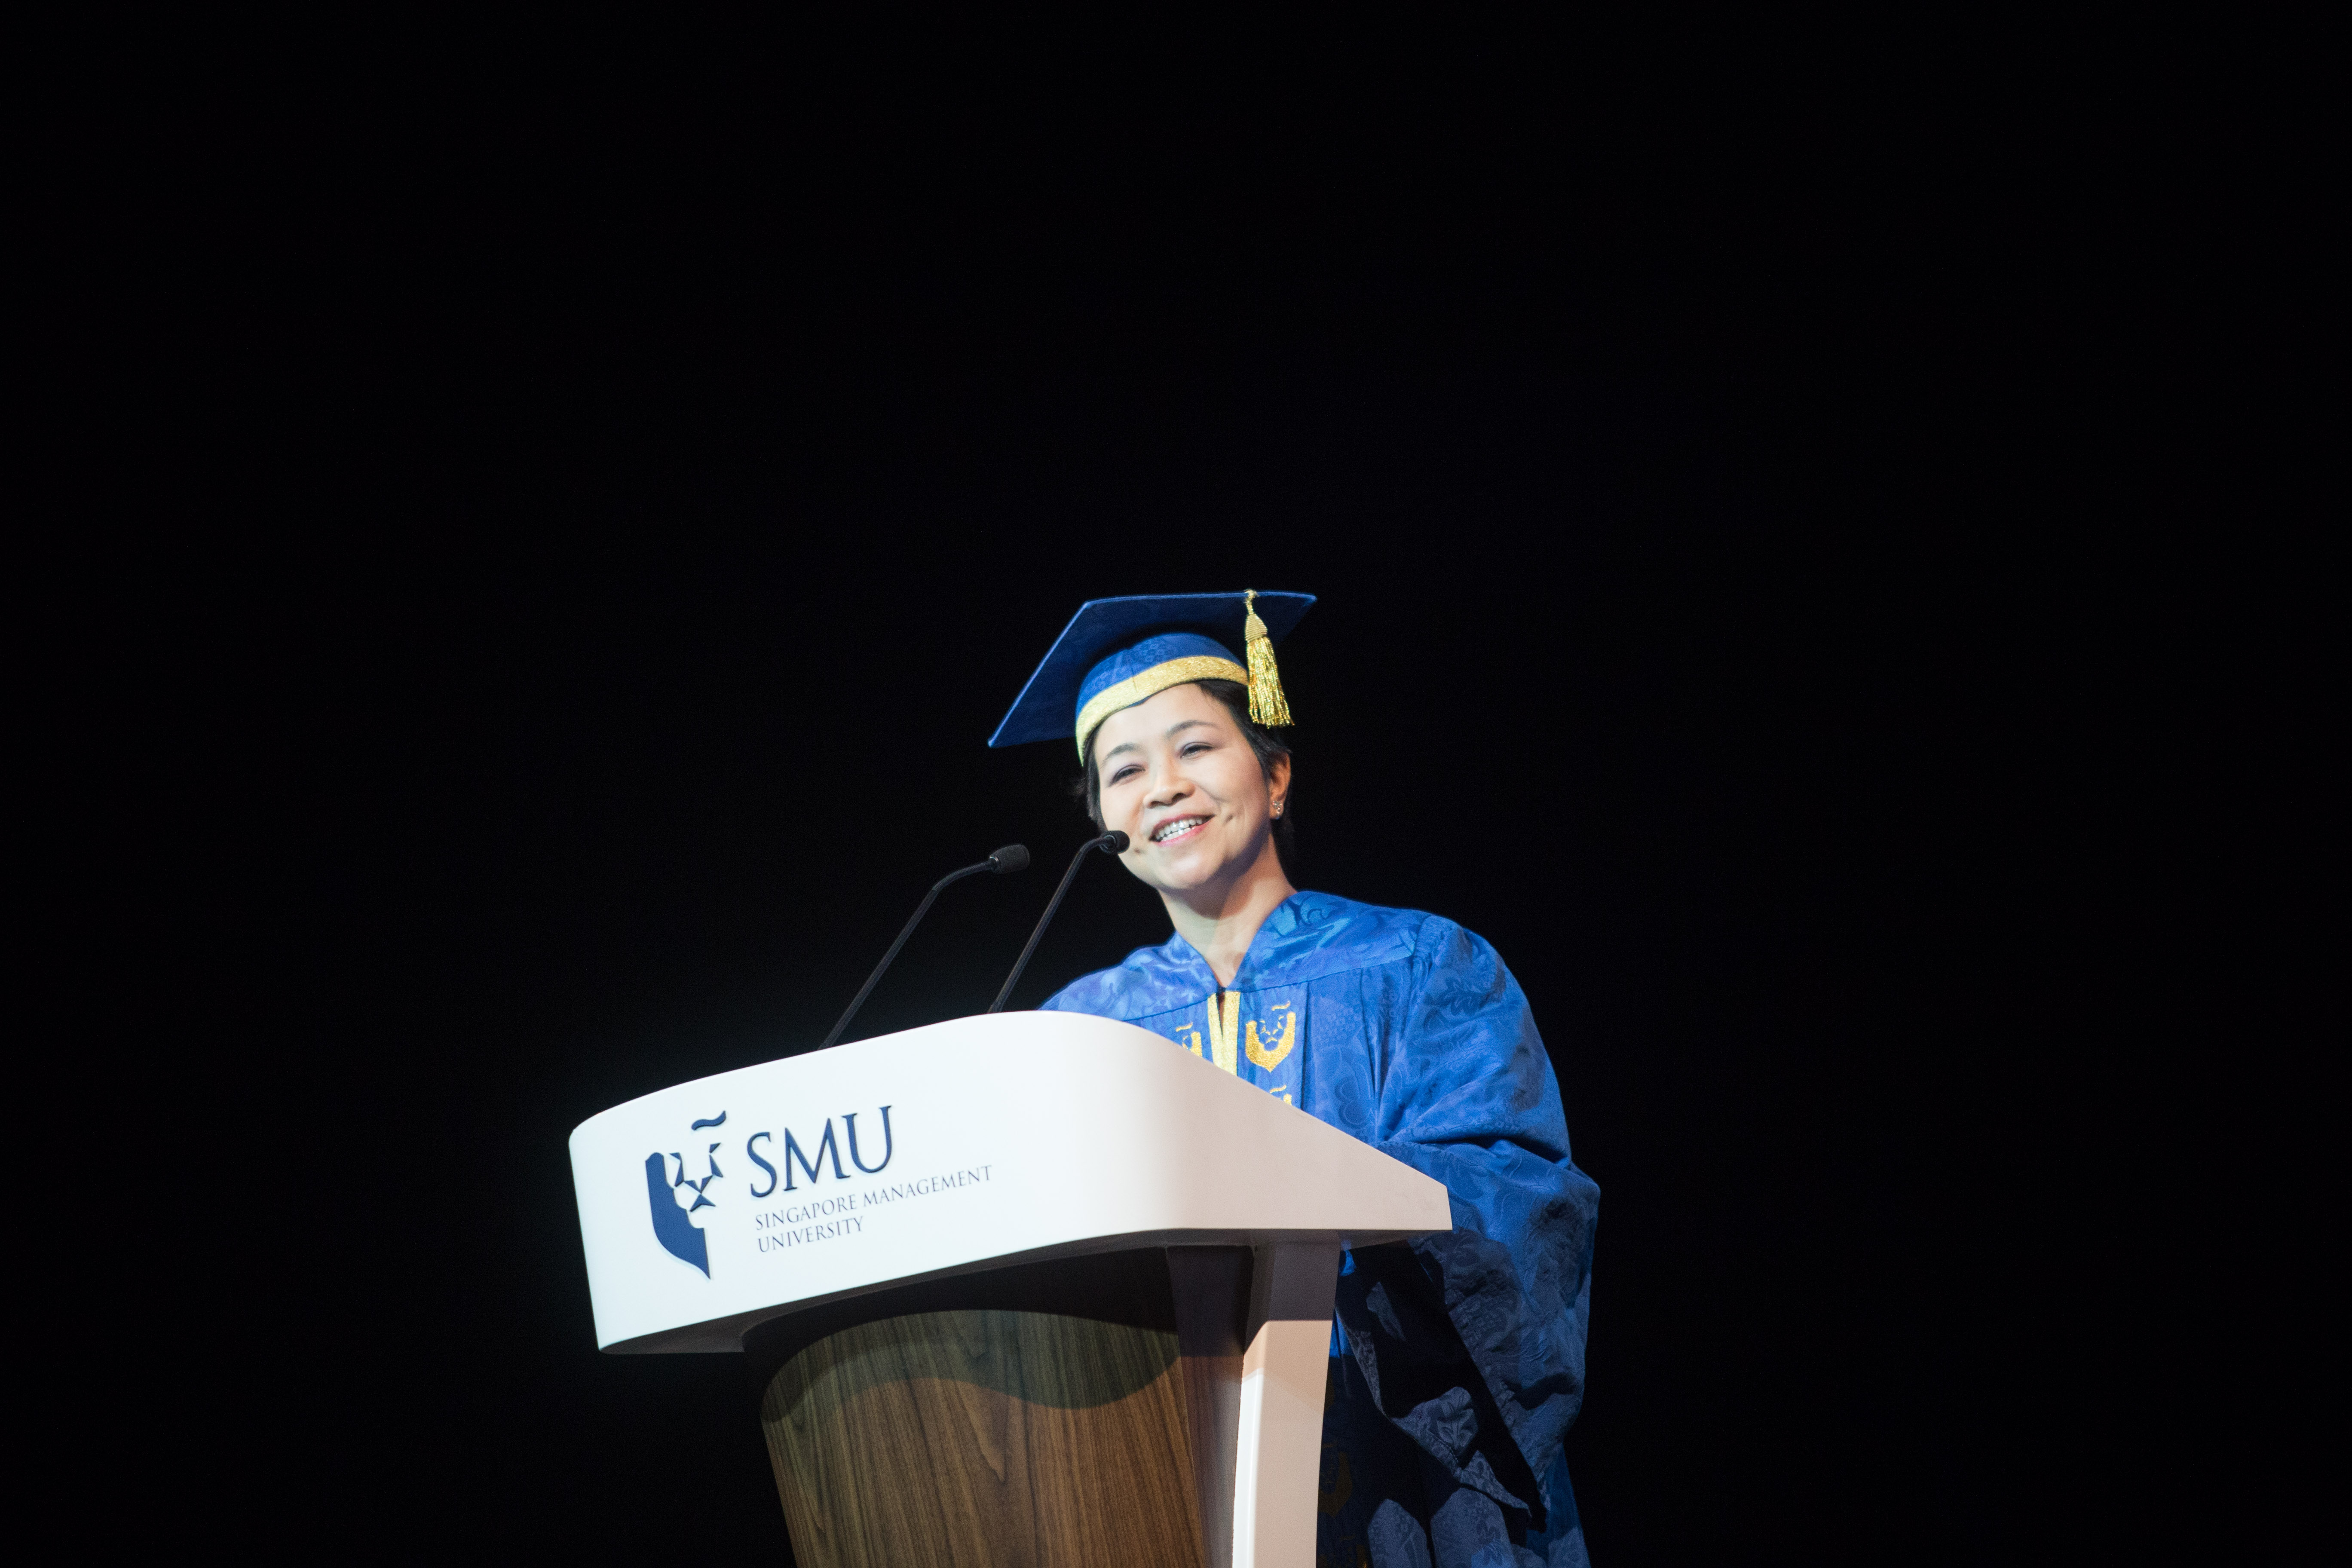 SMU Convocation 2014 Guest of Honour Ms Yong Ying-I delivers her keynote address.